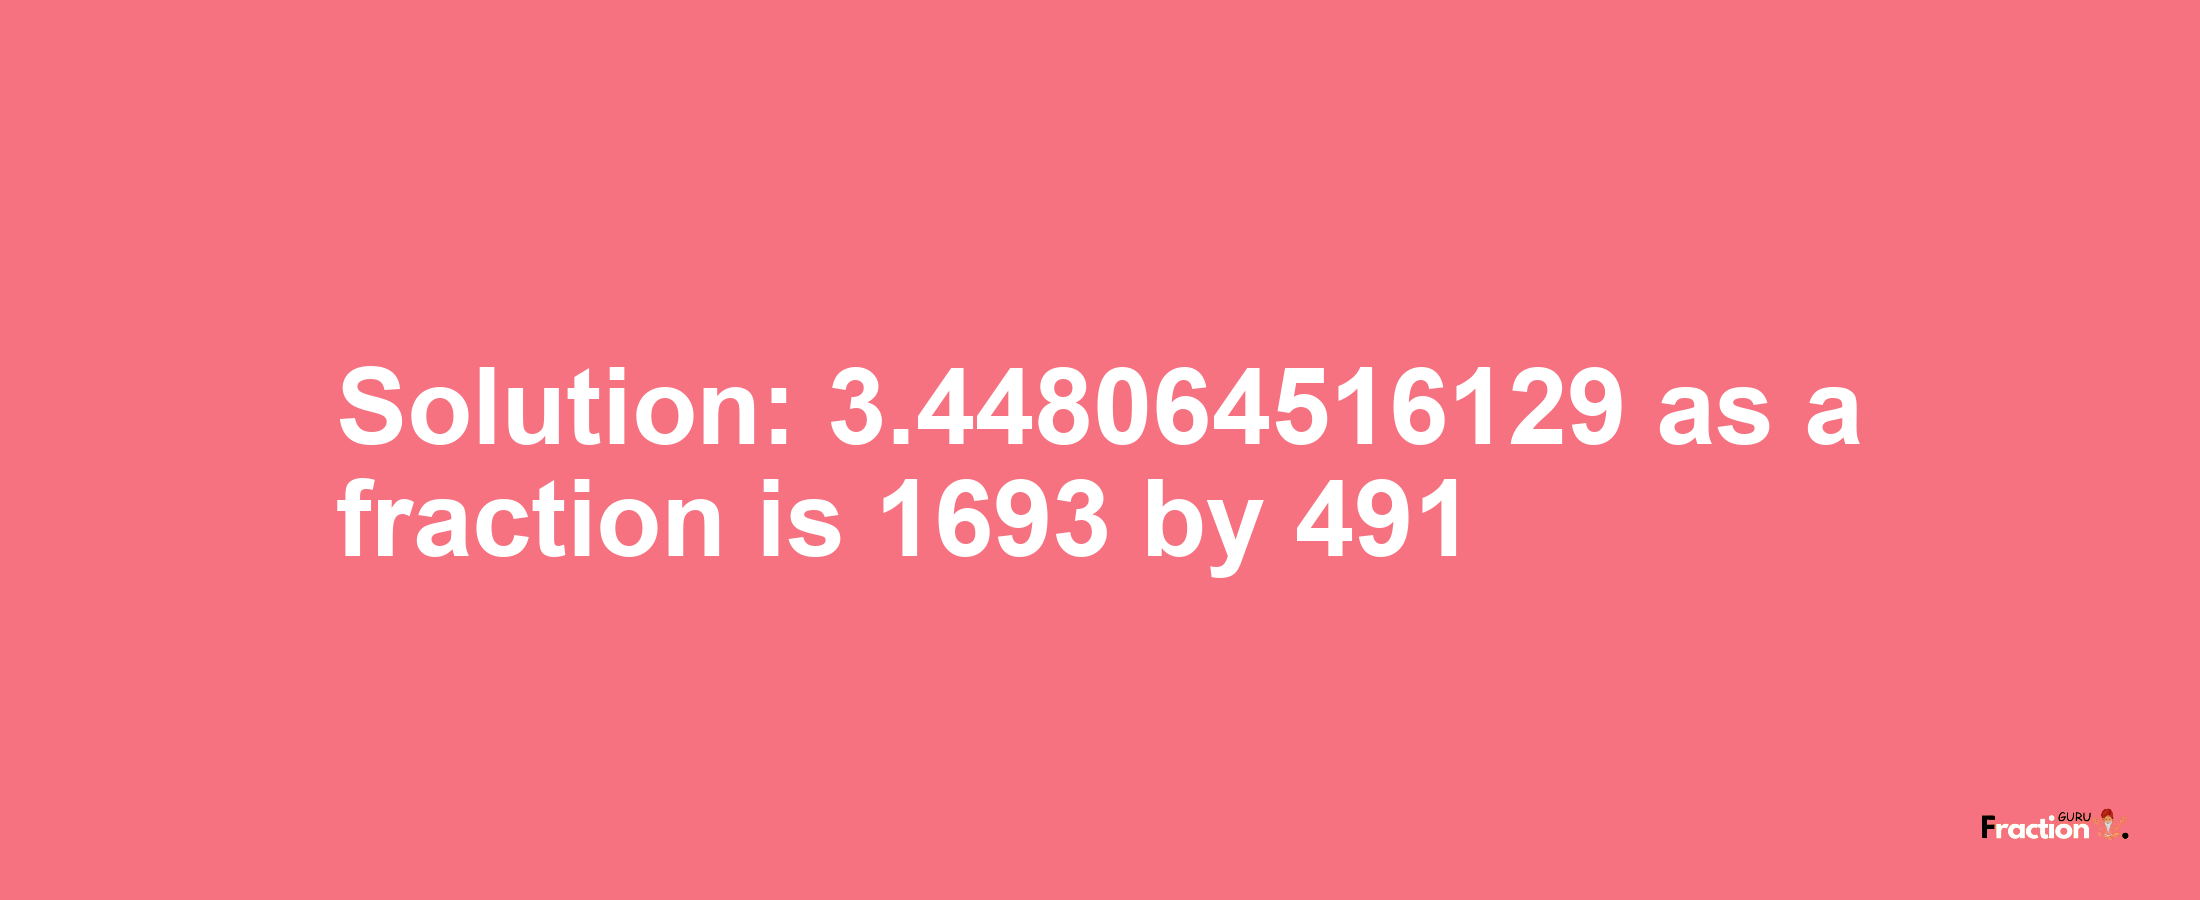 Solution:3.448064516129 as a fraction is 1693/491